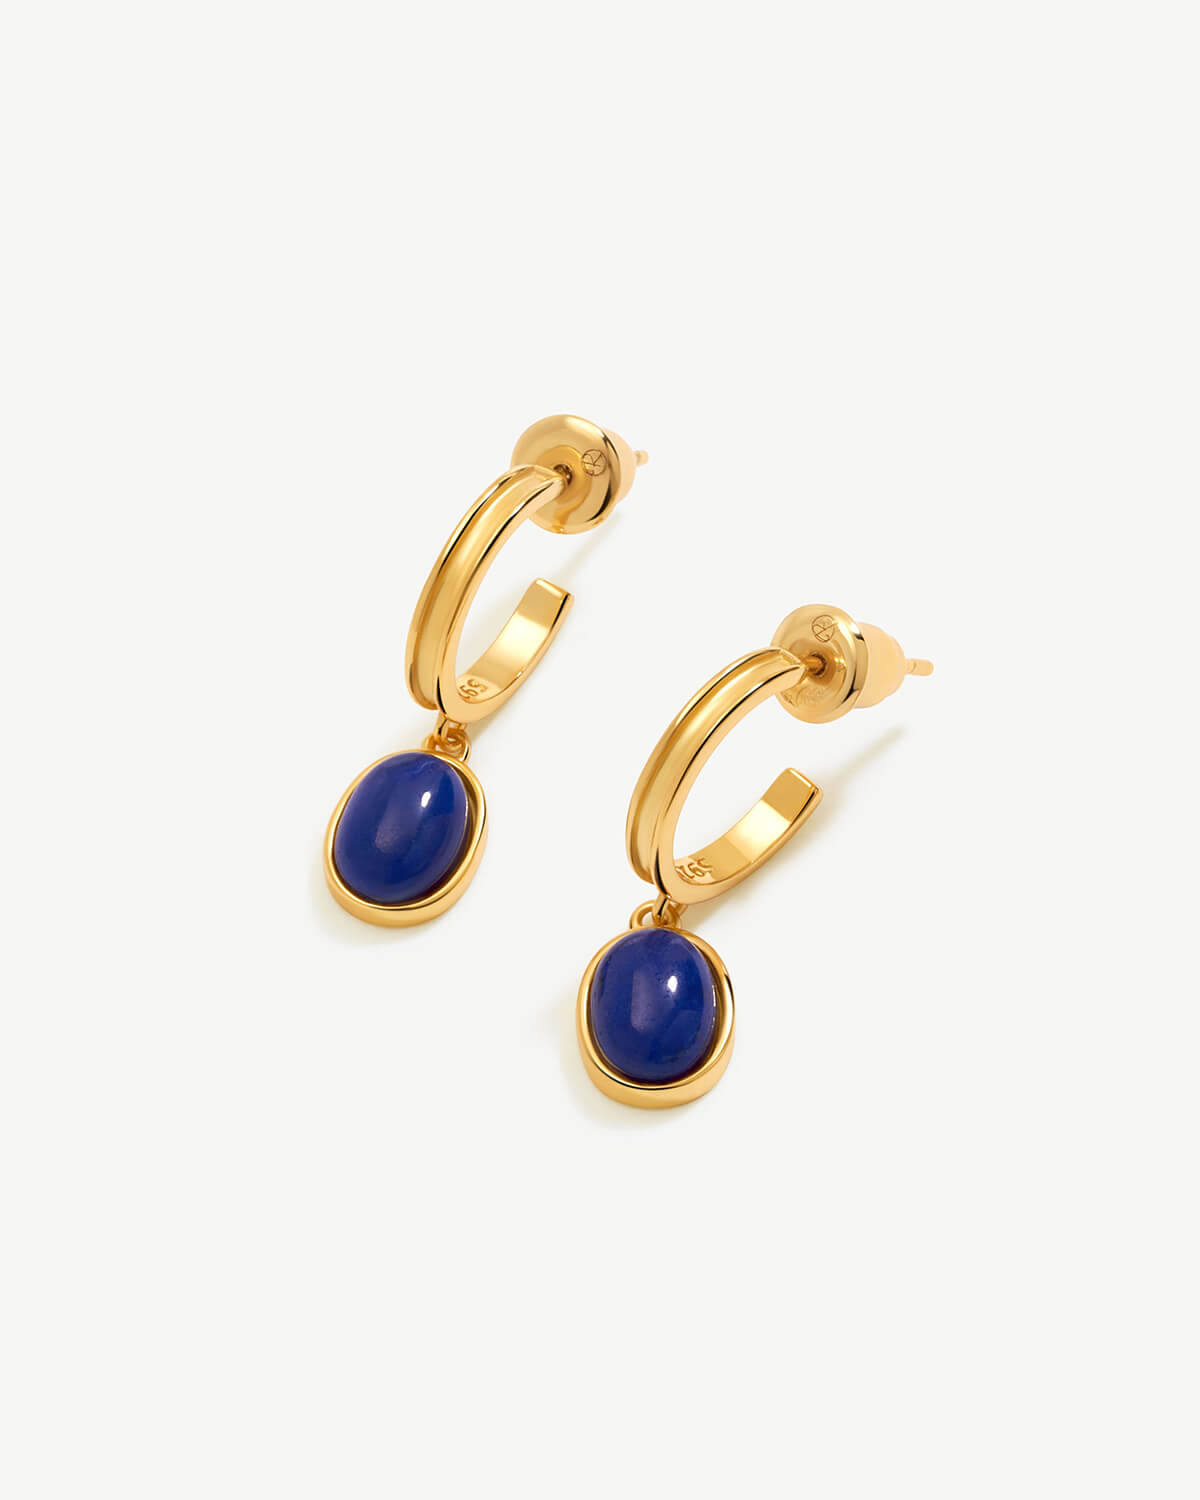 a pair of earrings with a blue stone